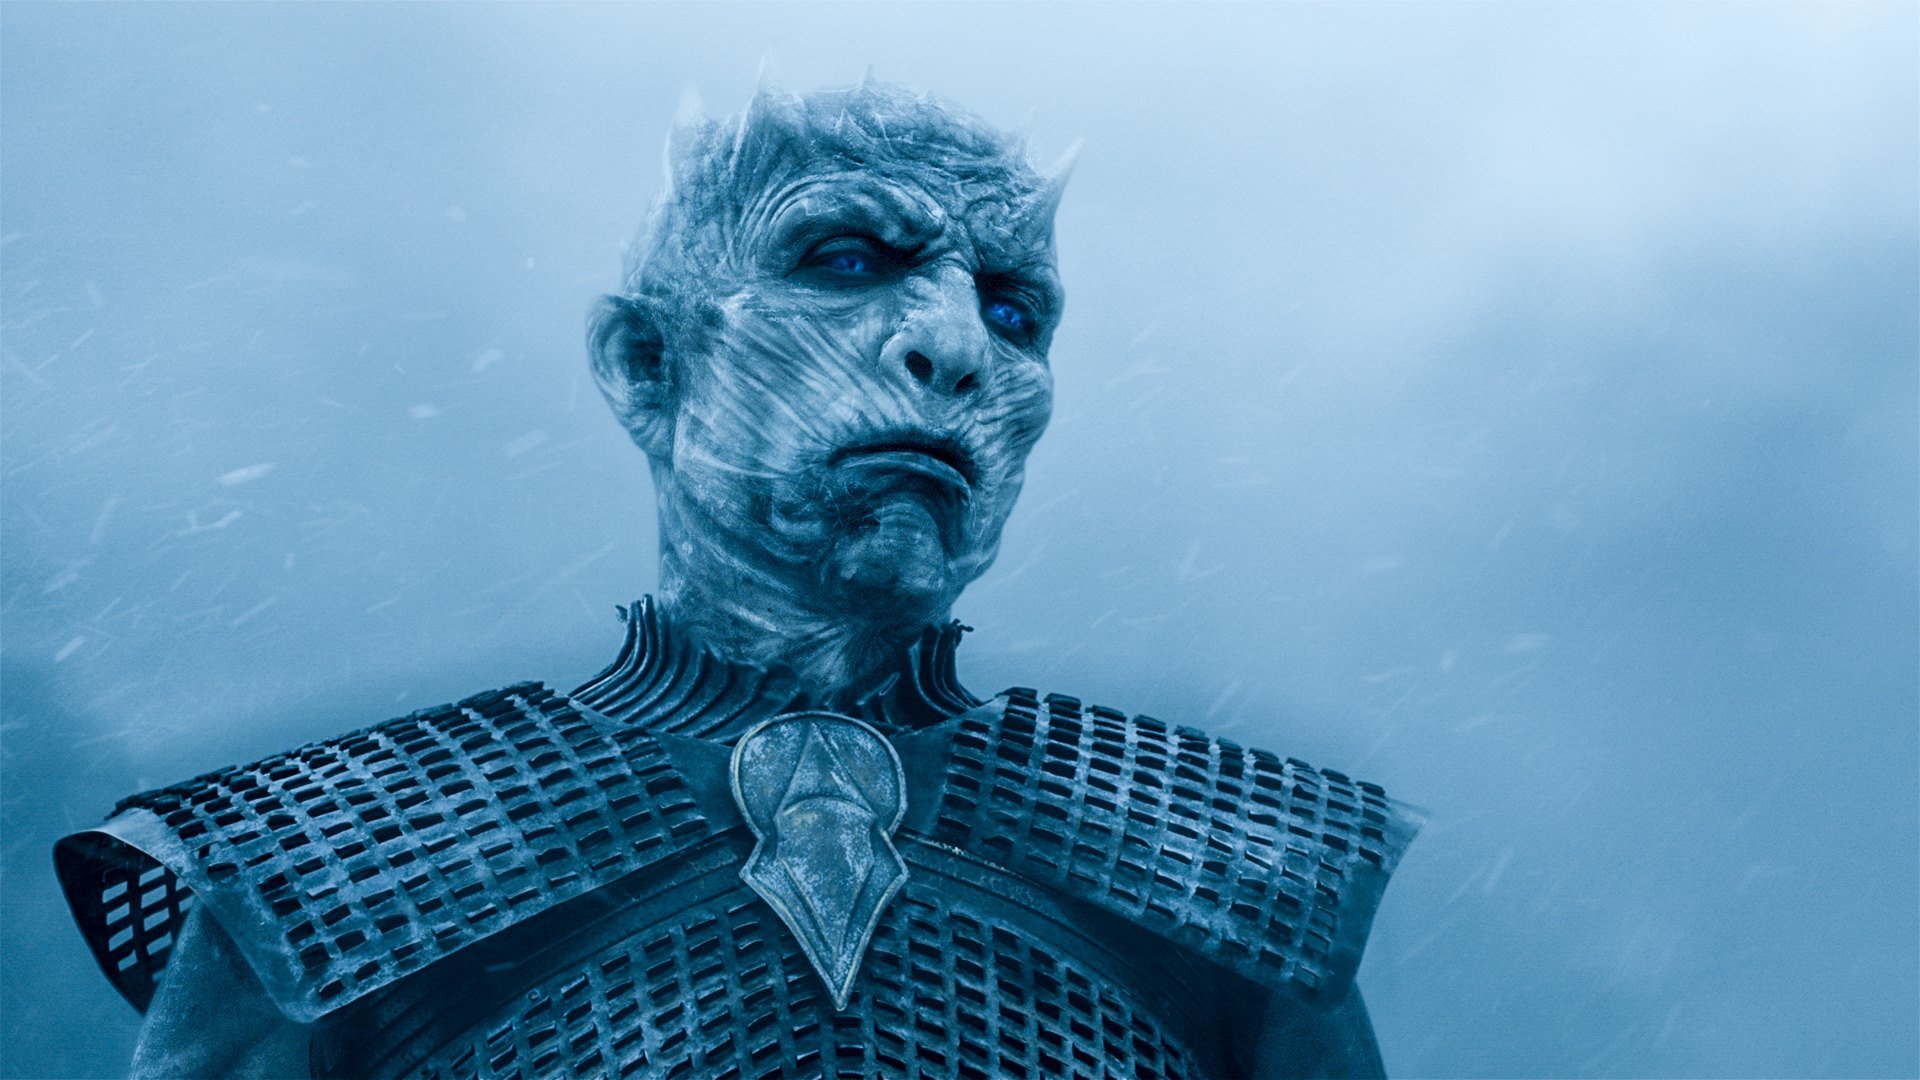 Wallpapers Game Of Thrones Night King White Walkers on the desktop